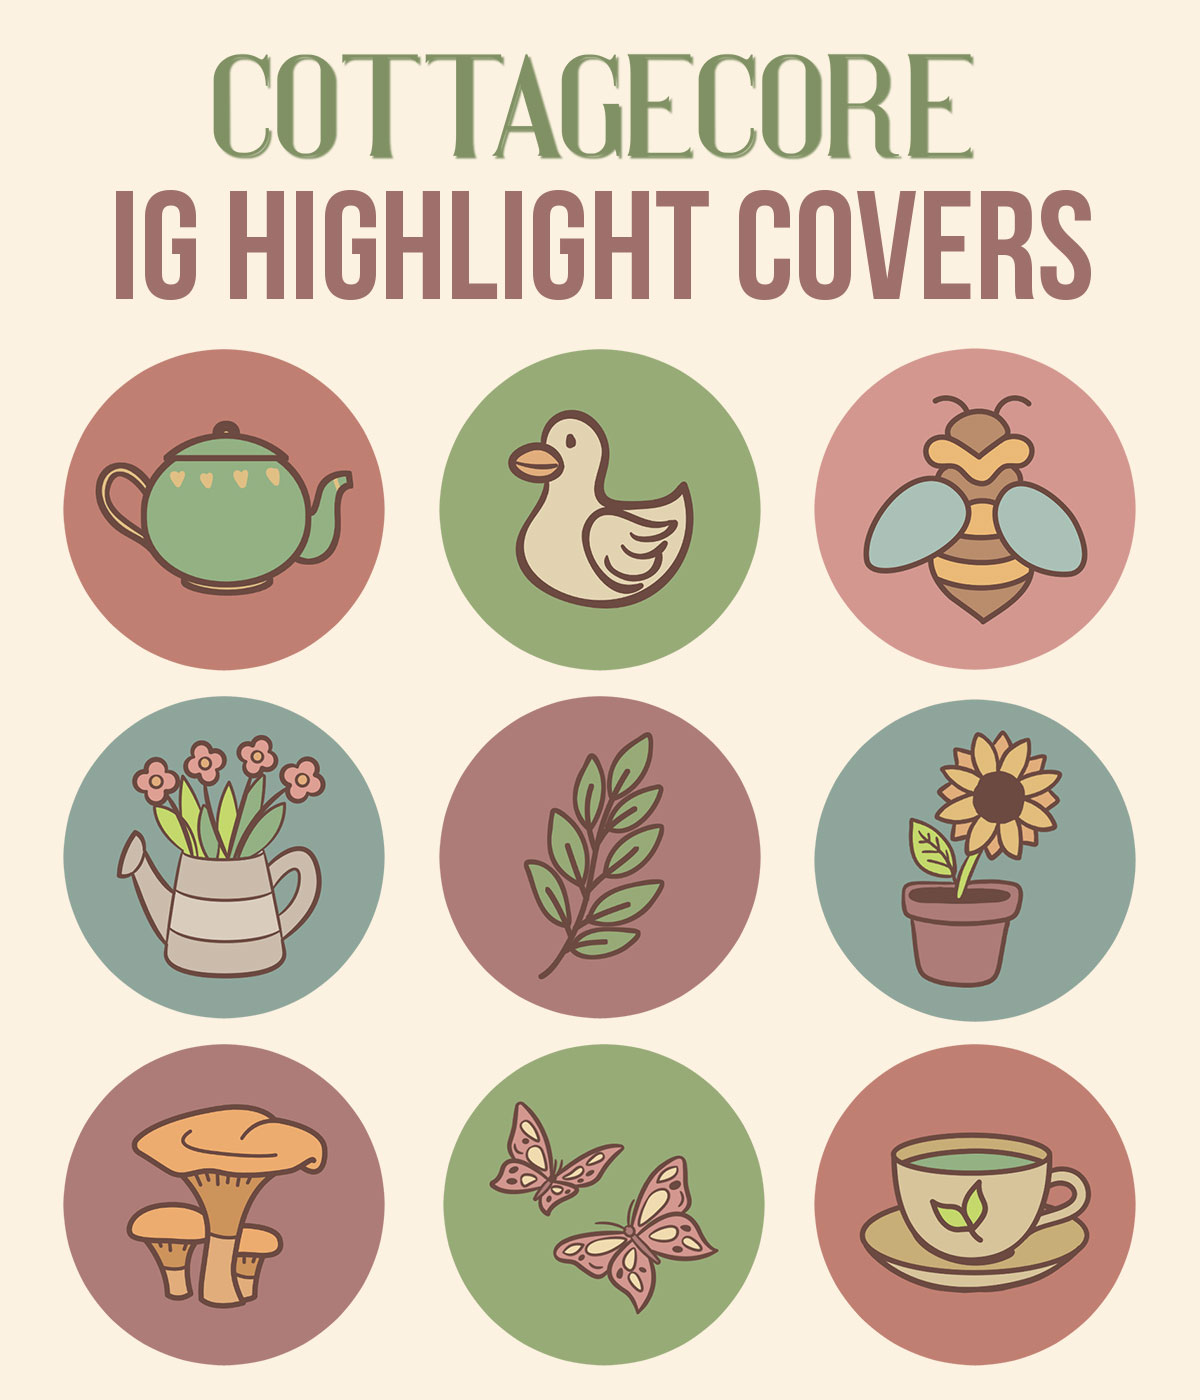 cottagecore ig highlight covers pack